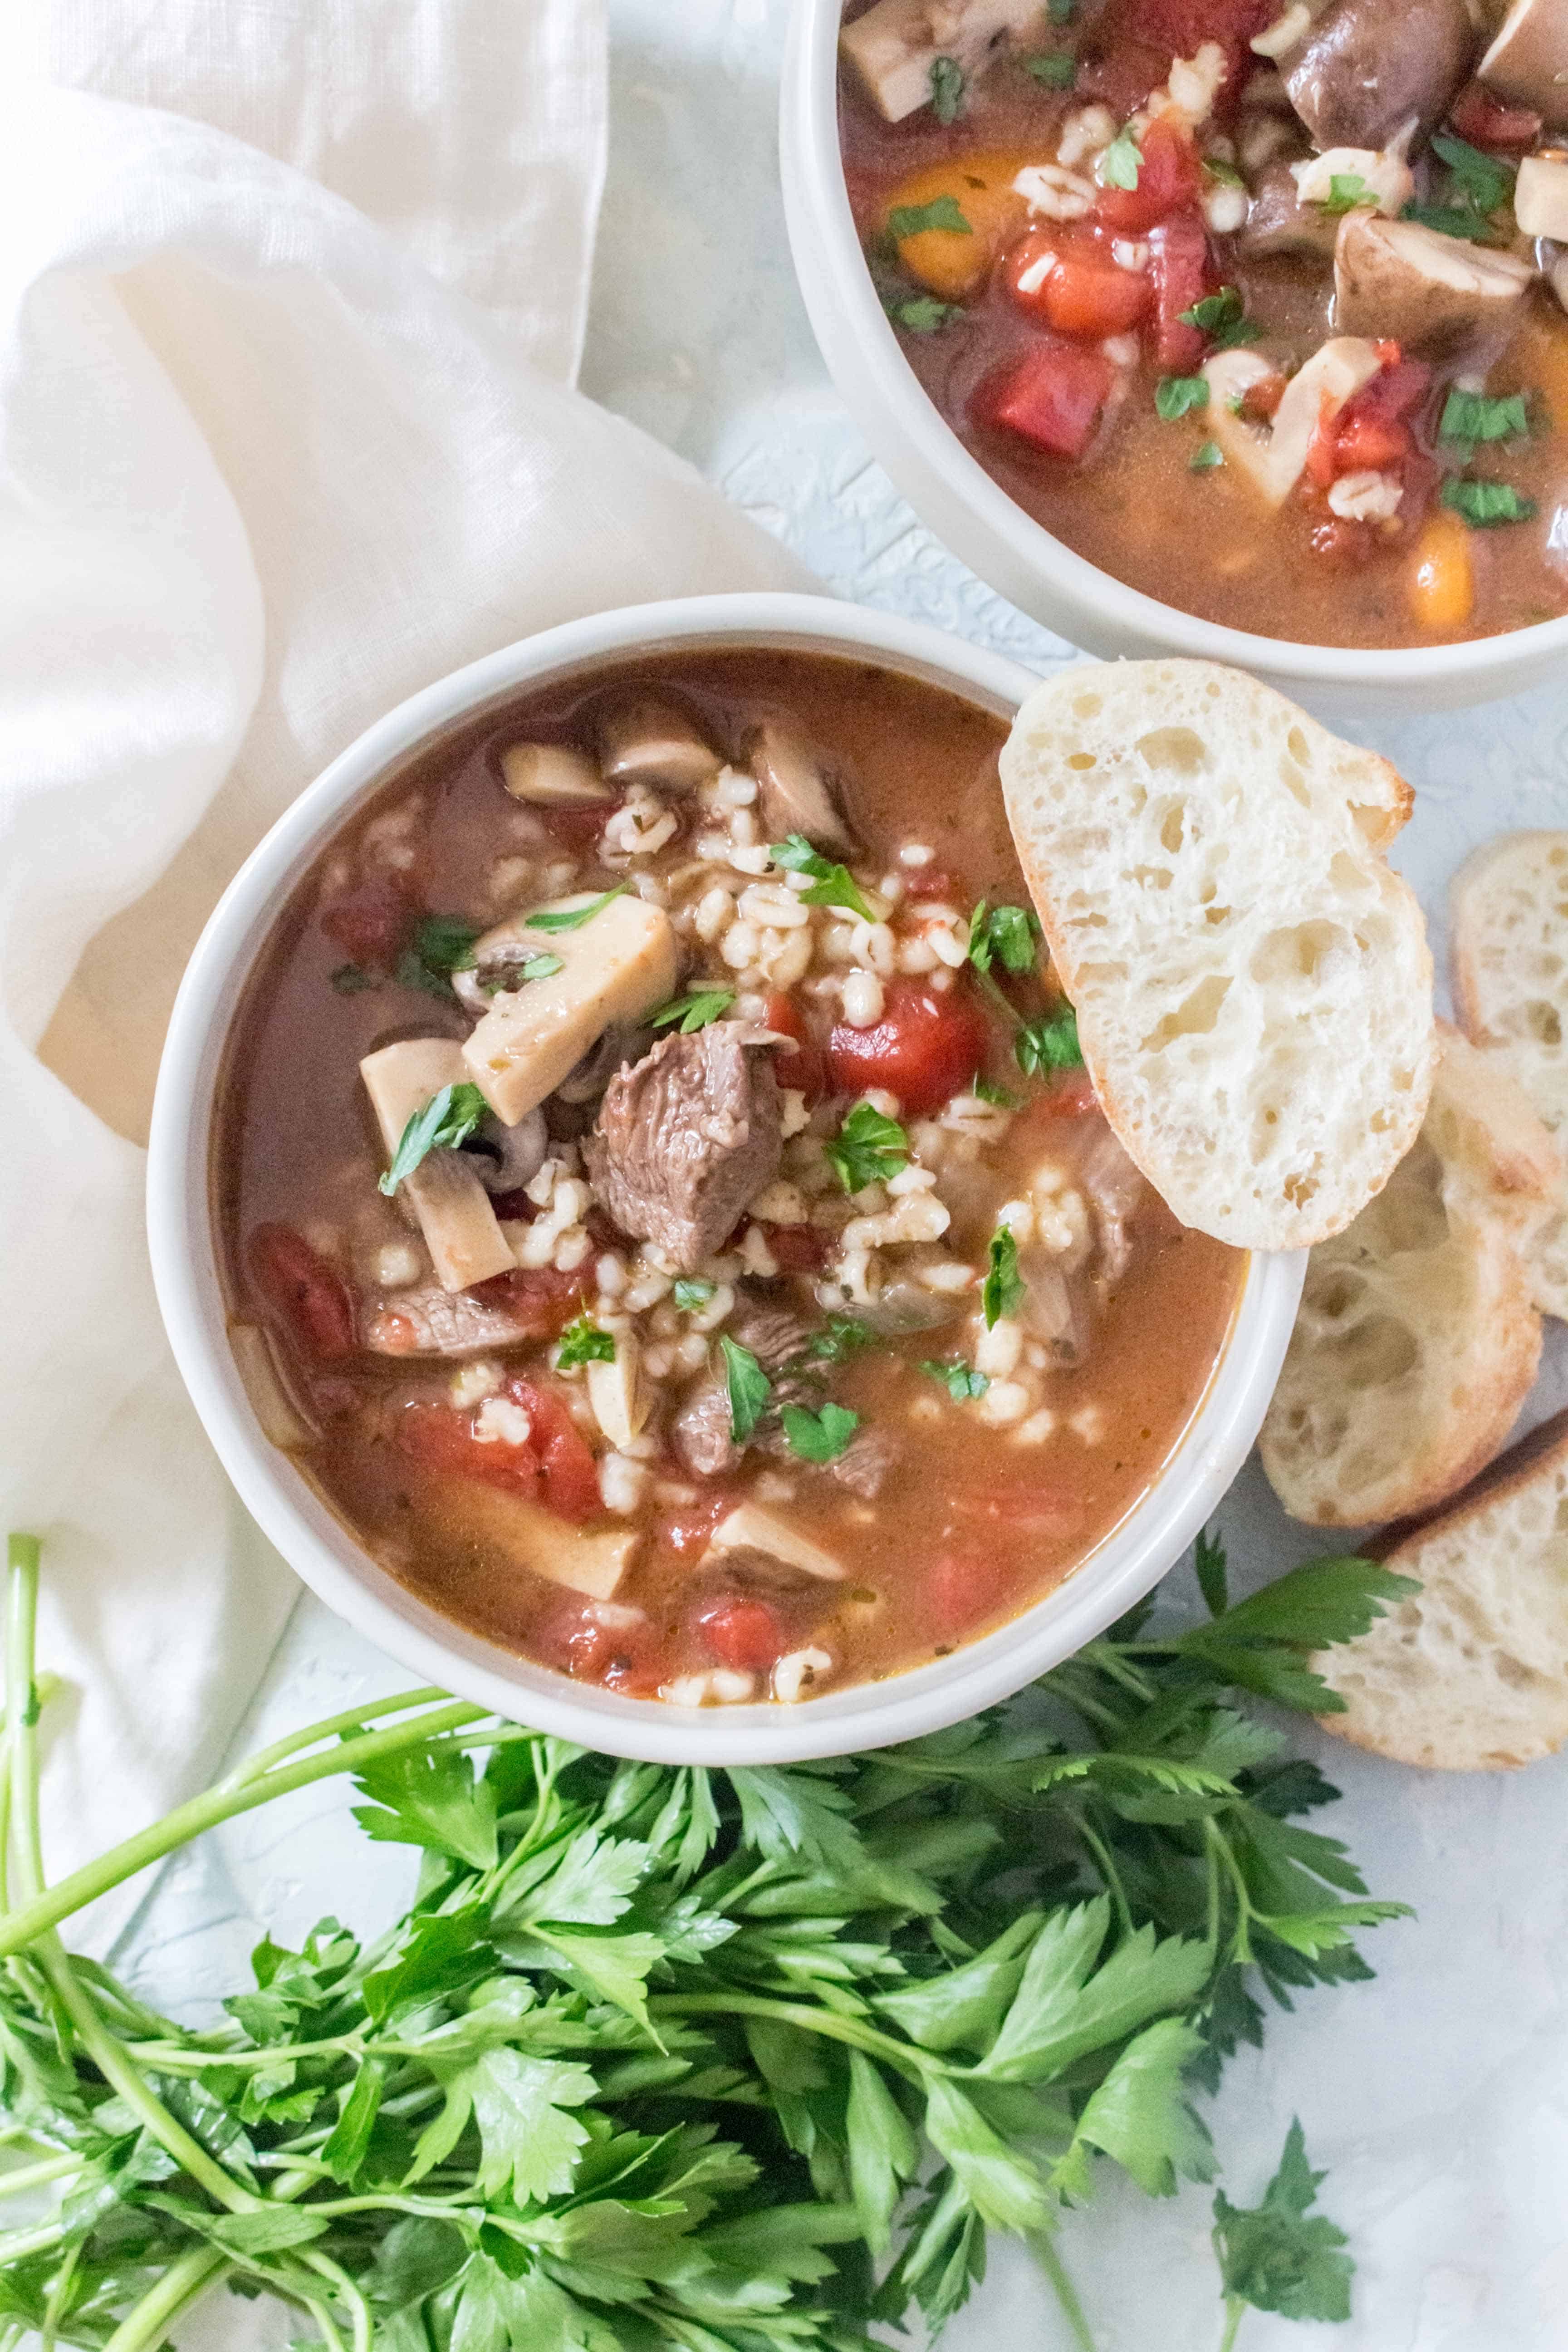 Super rich, freezer friendly, and delicious, this Instant Pot Beef and Barley Soup is comfort in a bowl!